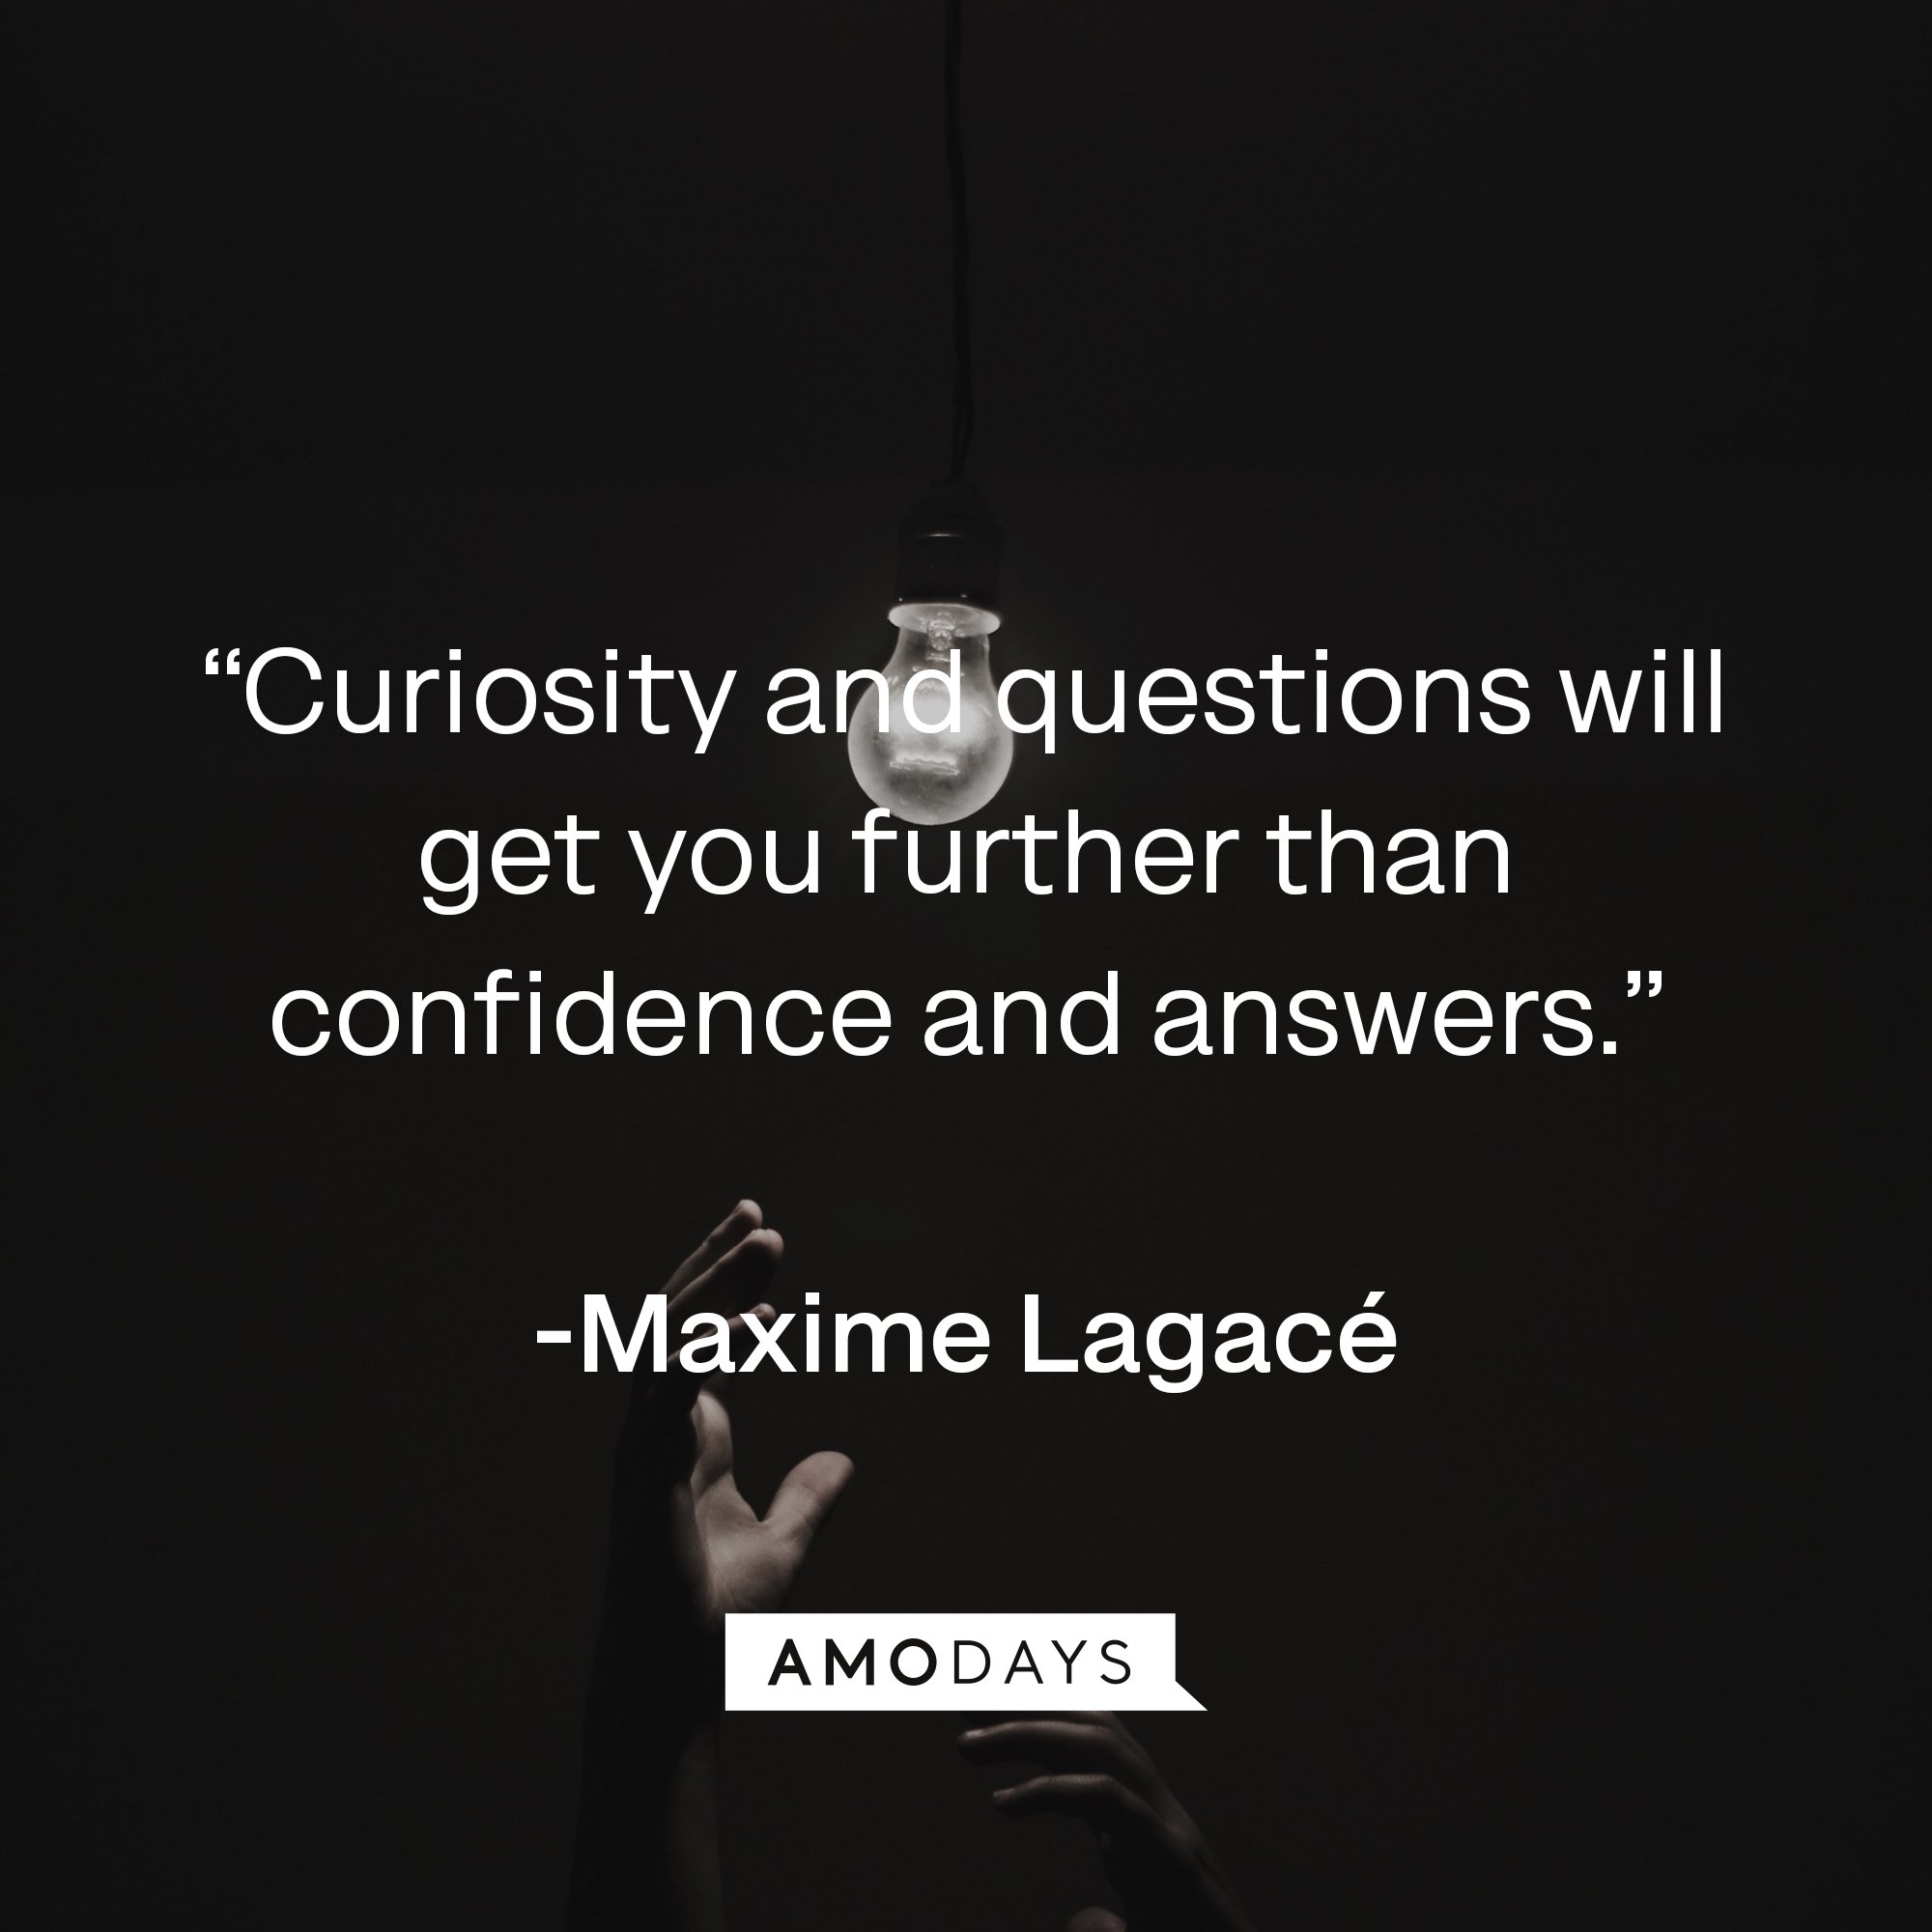 Maxime Lagacé's quote: “Curiosity and questions will get you further than confidence and answers.” | Image: AmoDays